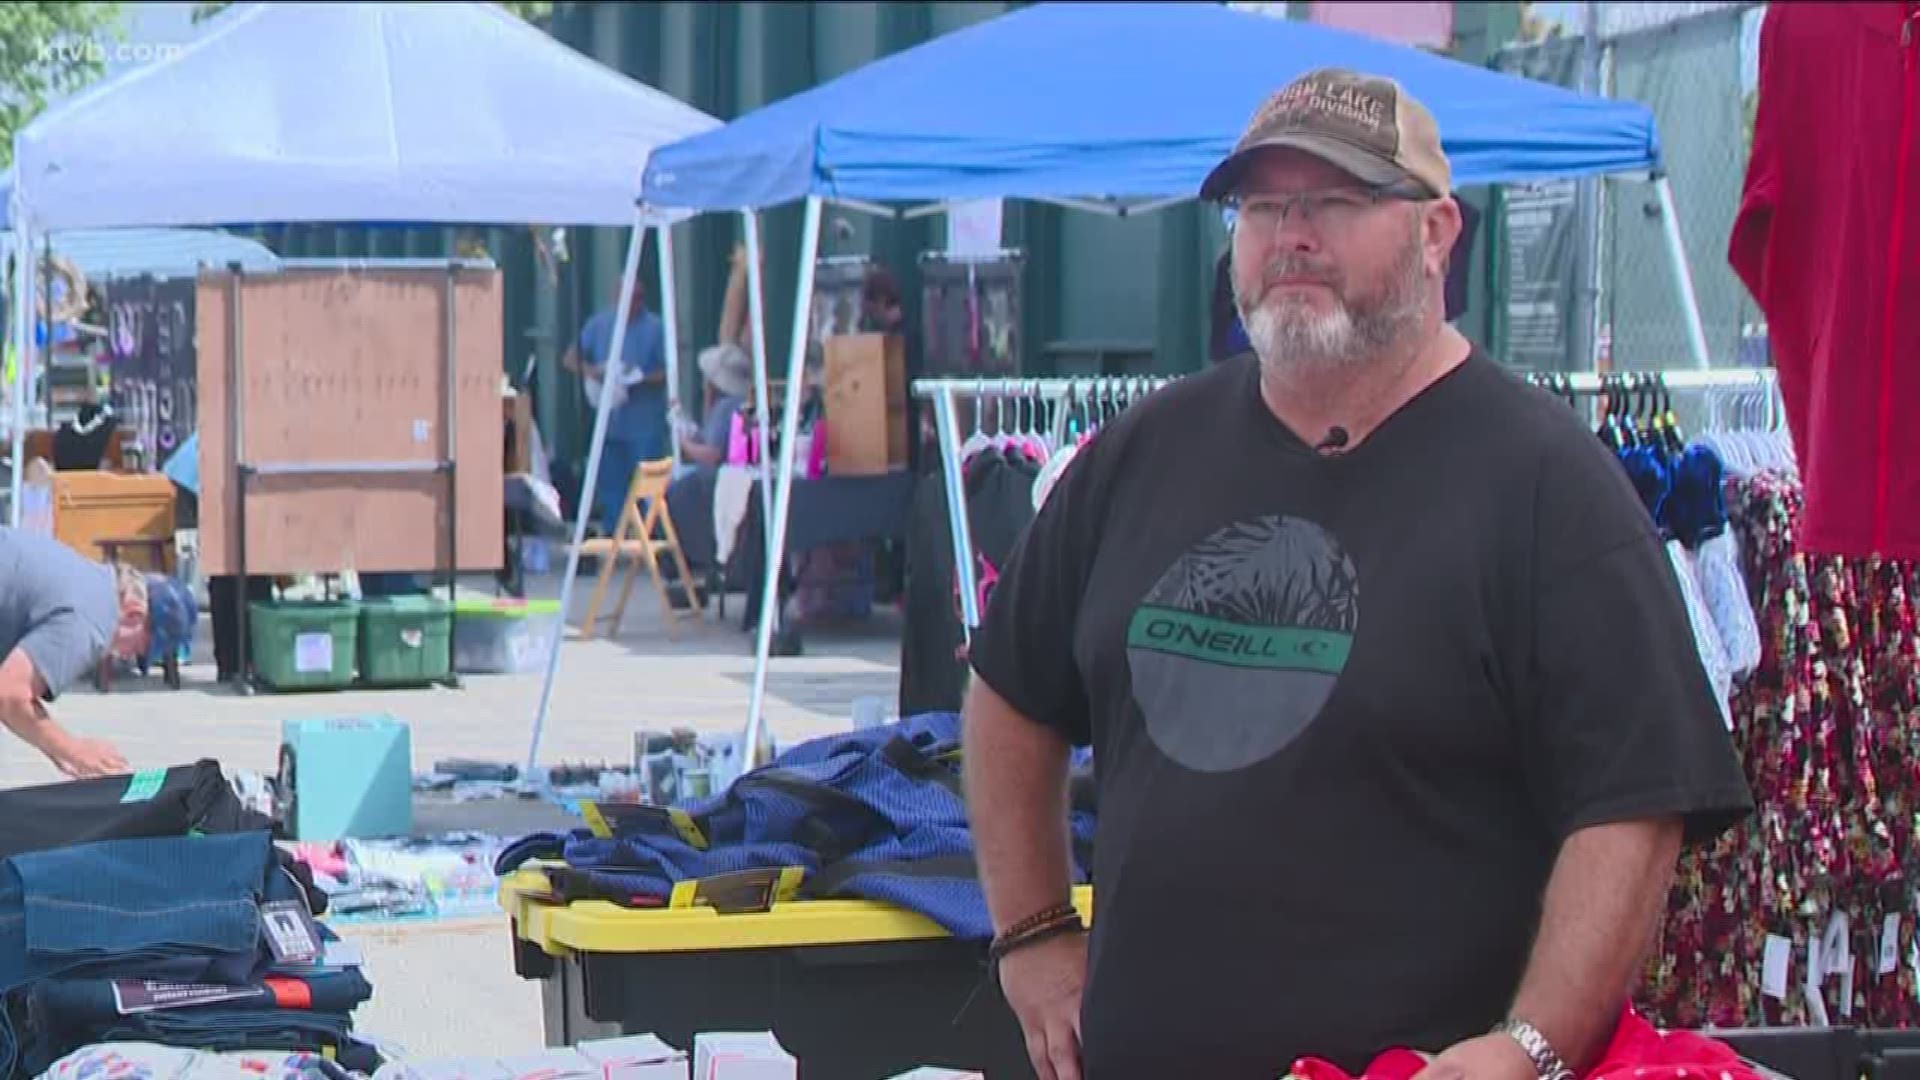 In a partnership with the Boise Hawks, the flea market is taking place a total of five weekends this summer at Hawks Memorial Stadium